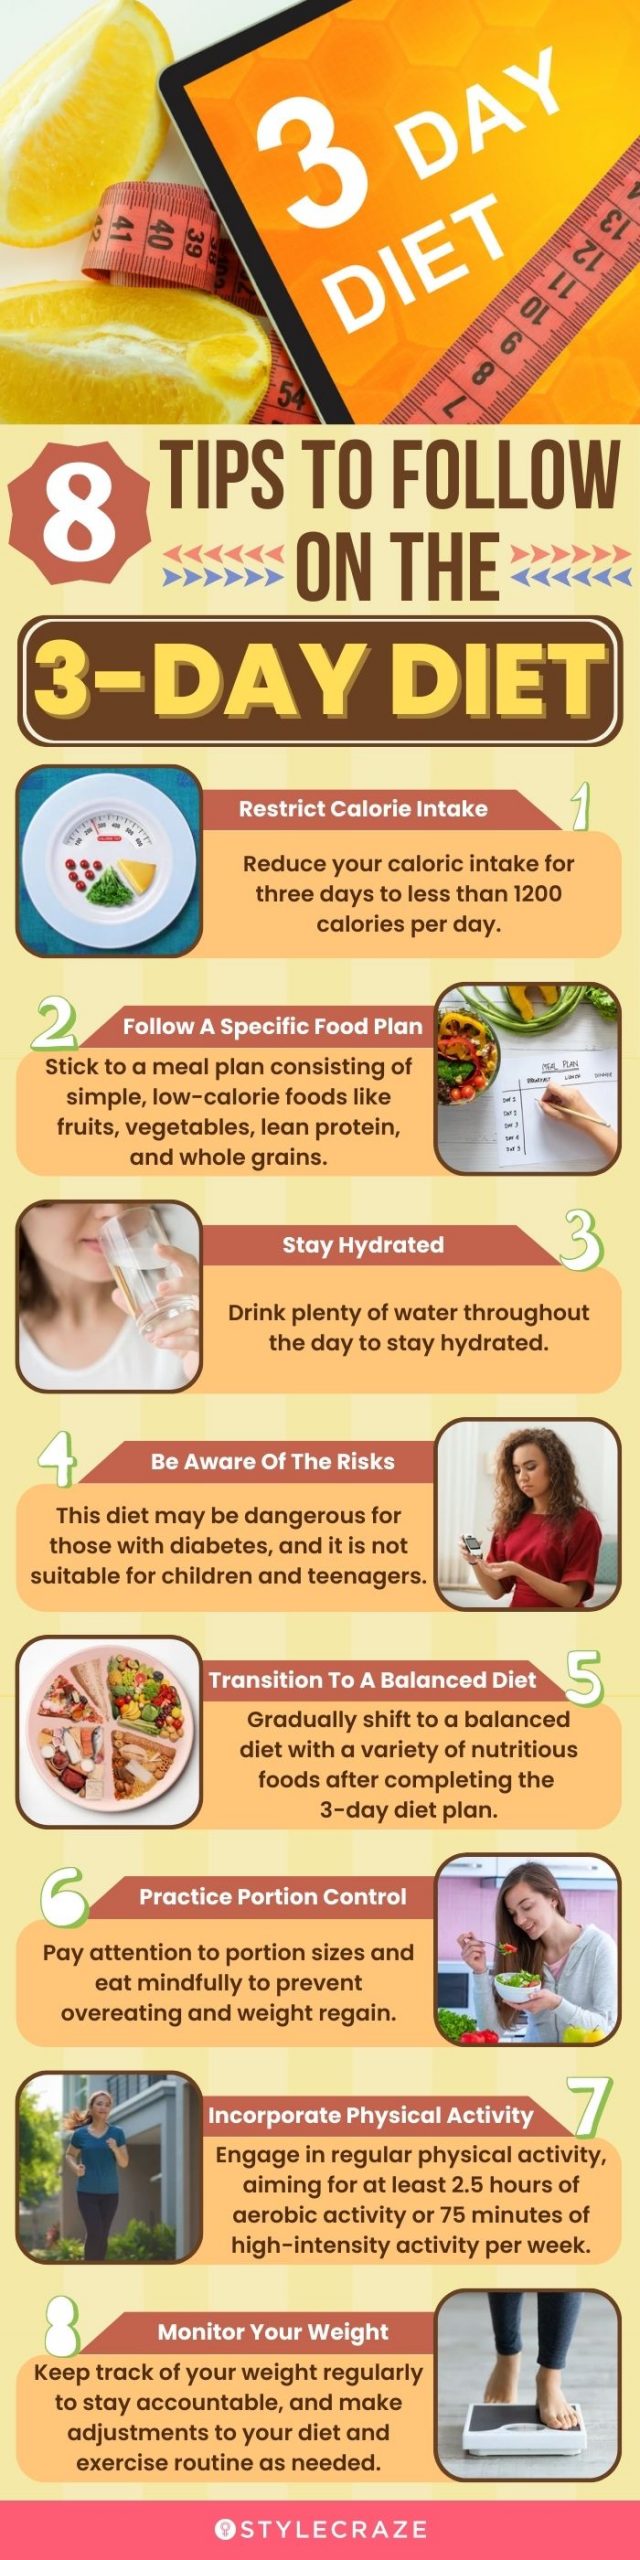 8 tips for the 3 day diet (infographic)